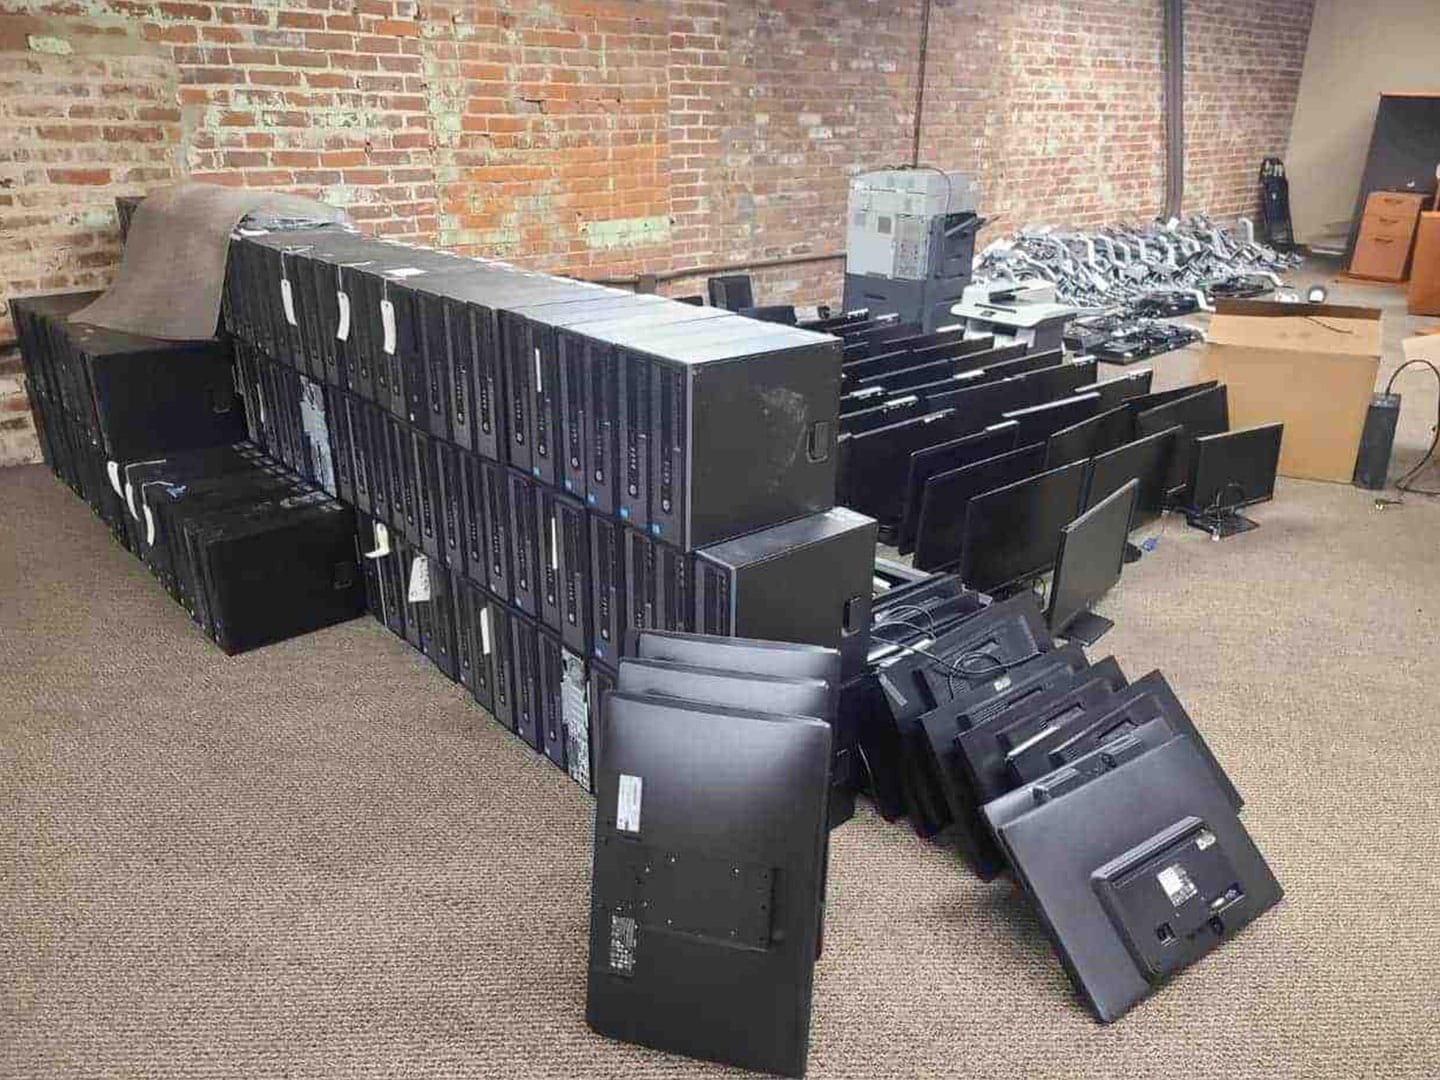 Business Computer Electronics & IT Equipment Disposal Recycling Services